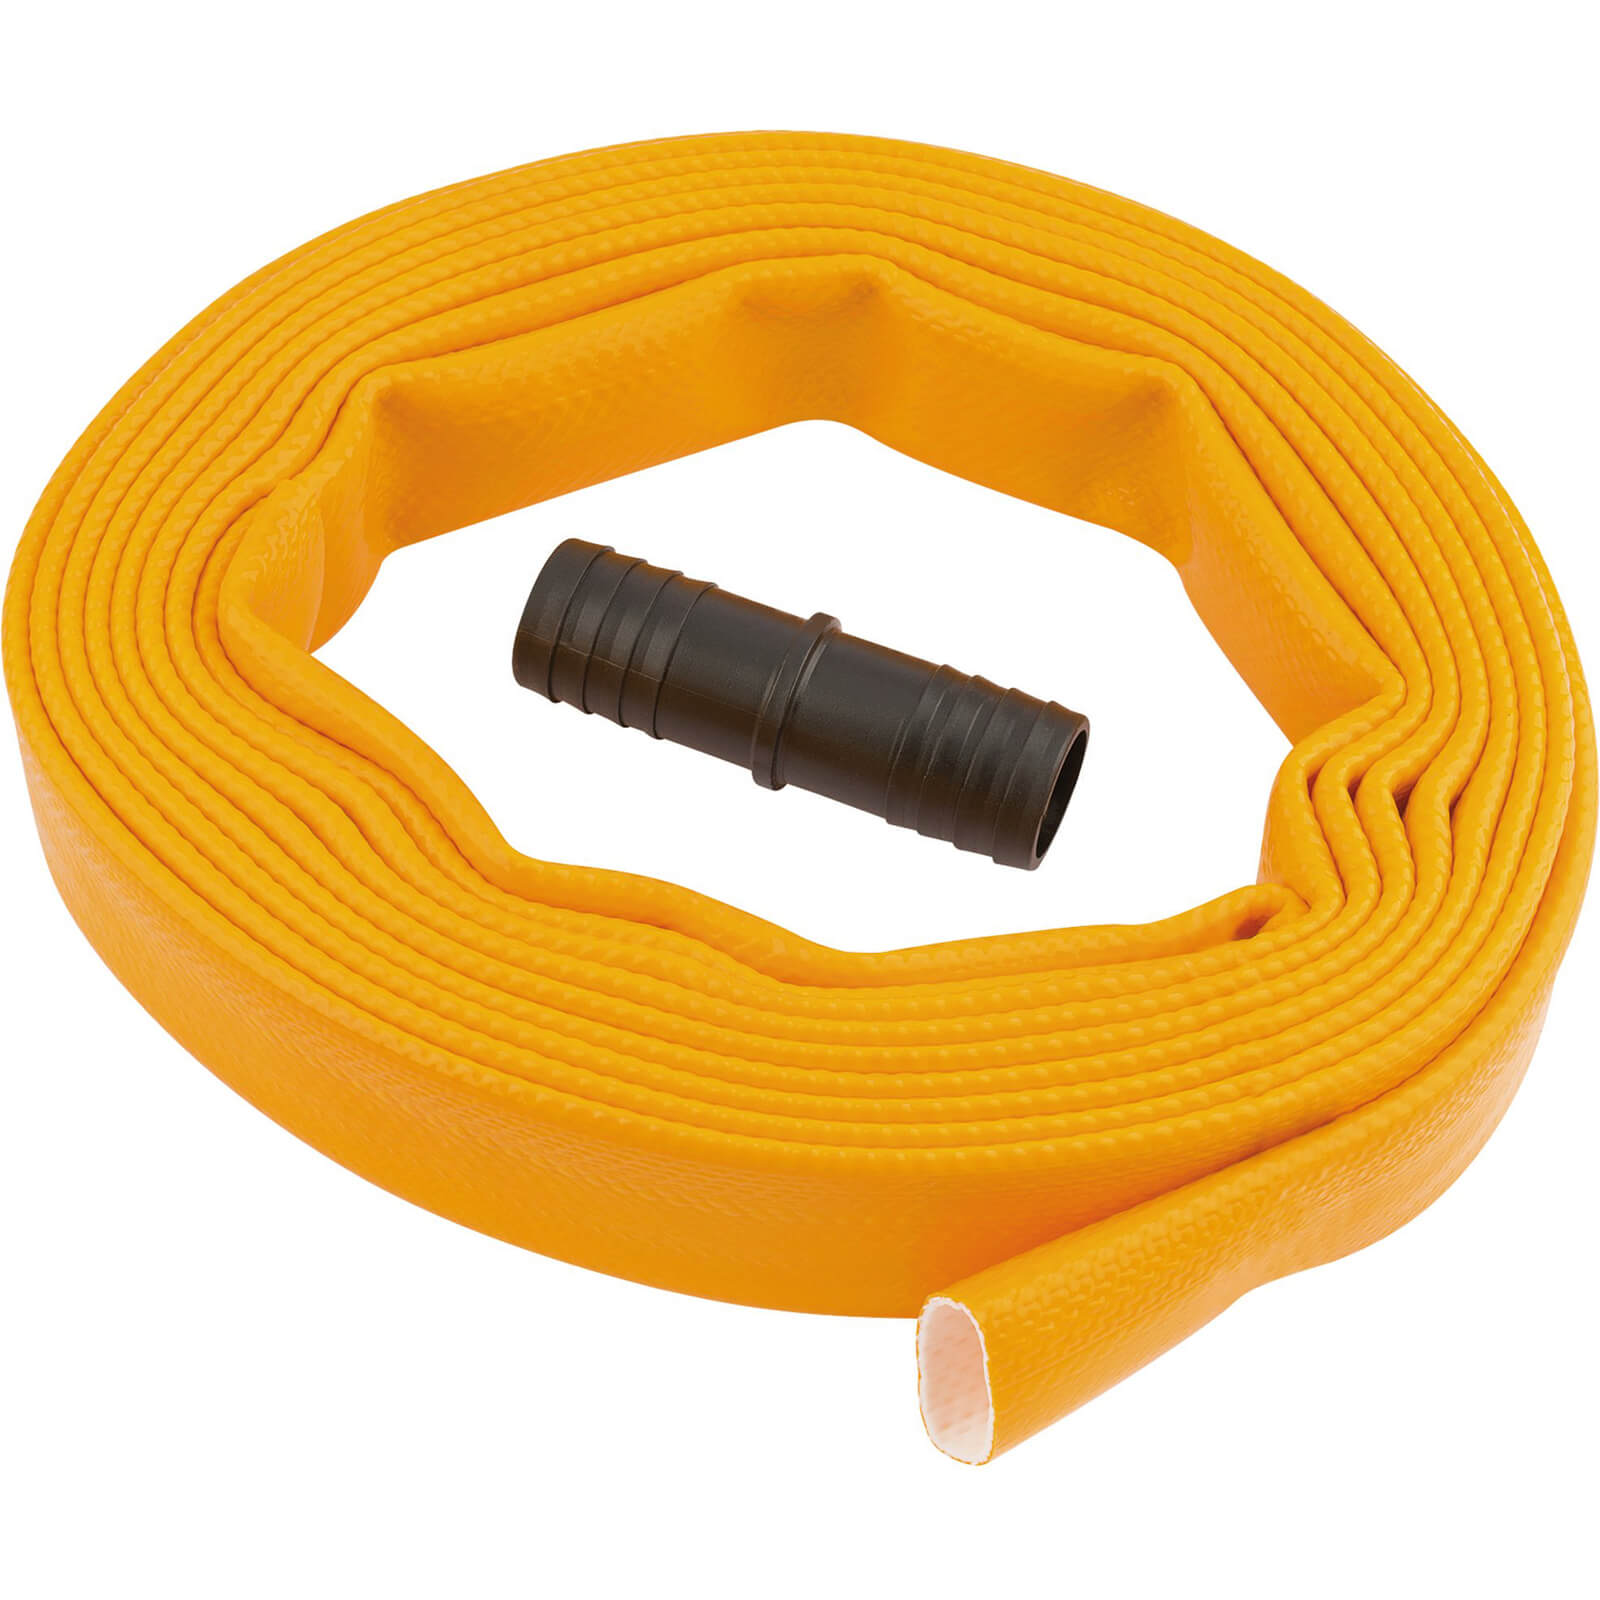 Photo of Draper Layflat Hose And Connection Adaptor 25mm 5m